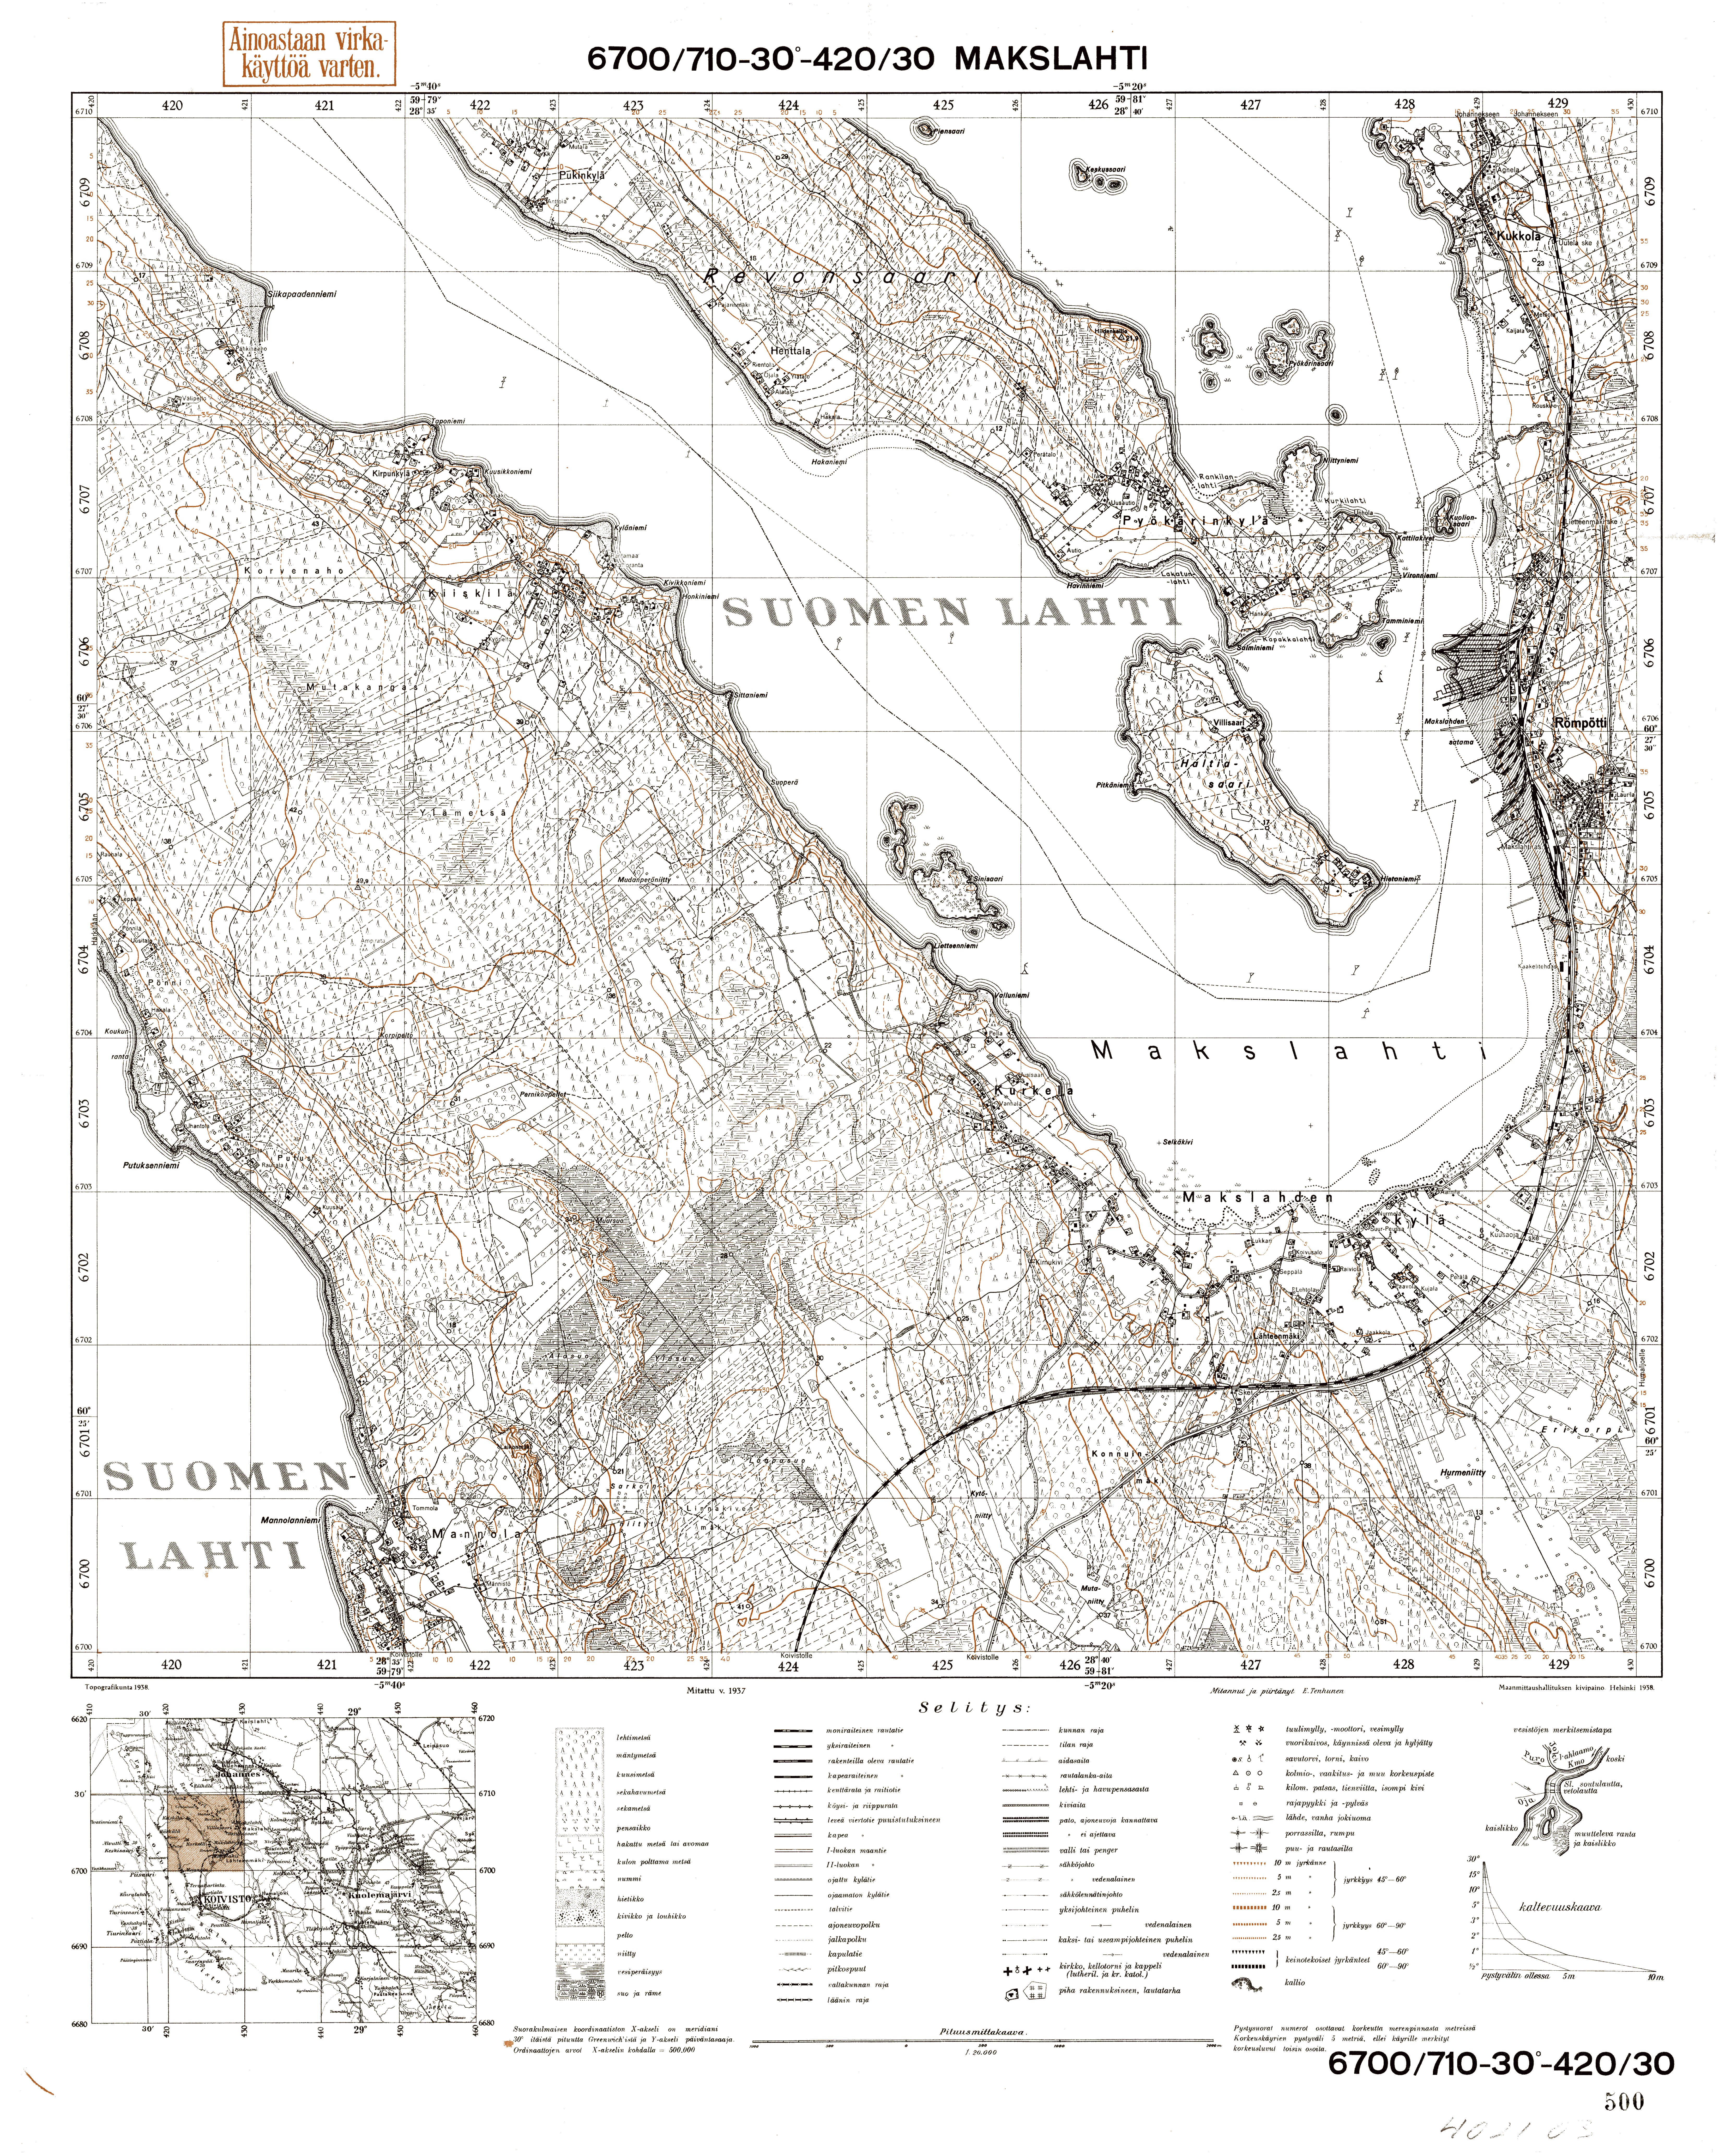 Glebytševo. Makslahti. Topografikartta 402103. Topographic map from 1938. Use the zooming tool to explore in higher level of detail. Obtain as a quality print or high resolution image